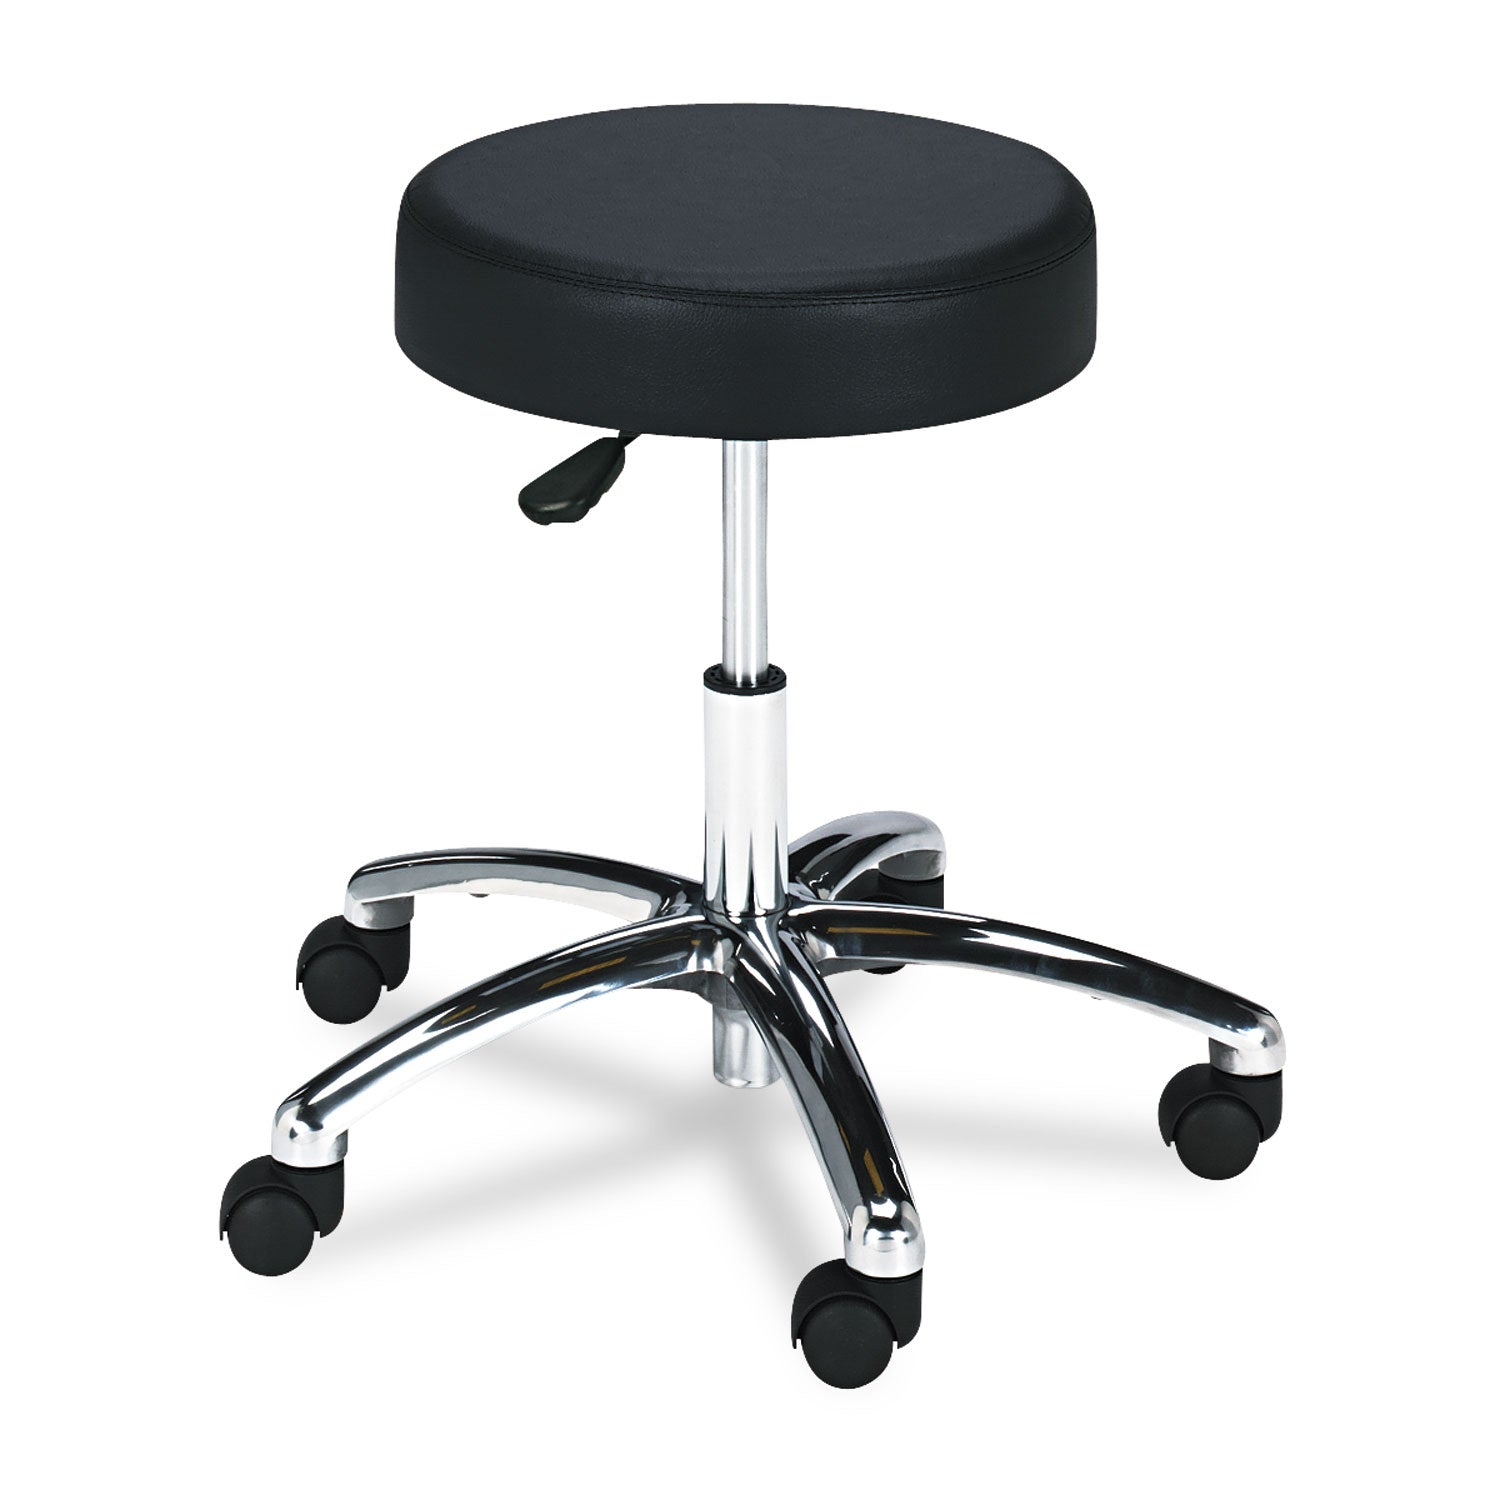 Pneumatic Lab Stool, Backless, Supports Up to 250 lb, 17" to 22" Seat Height, Black Seat, Chrome Base - 